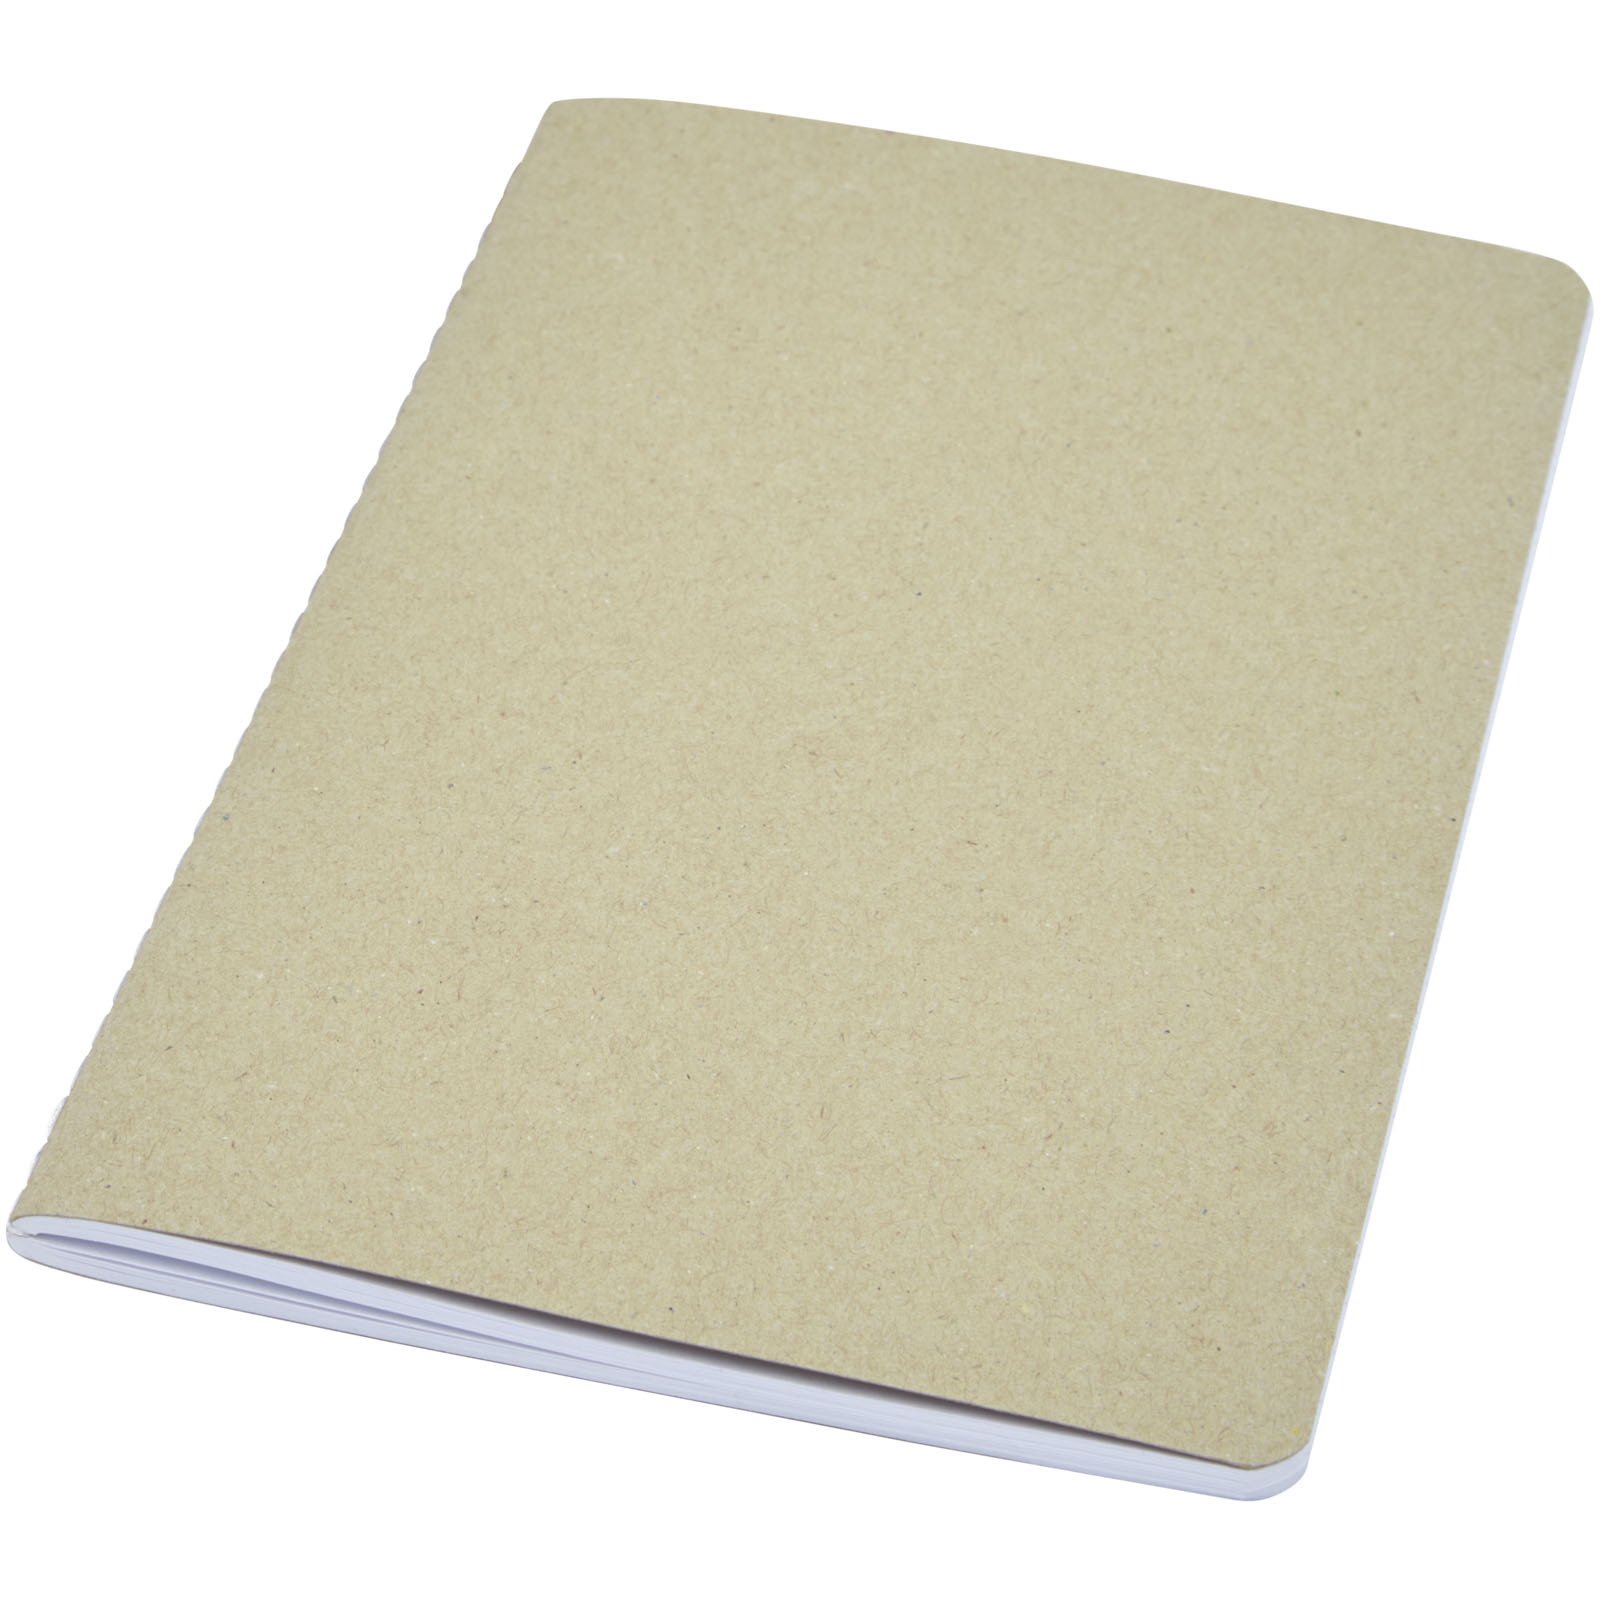 Advertising Notebooks - Gianna recycled cardboard notebook - 0